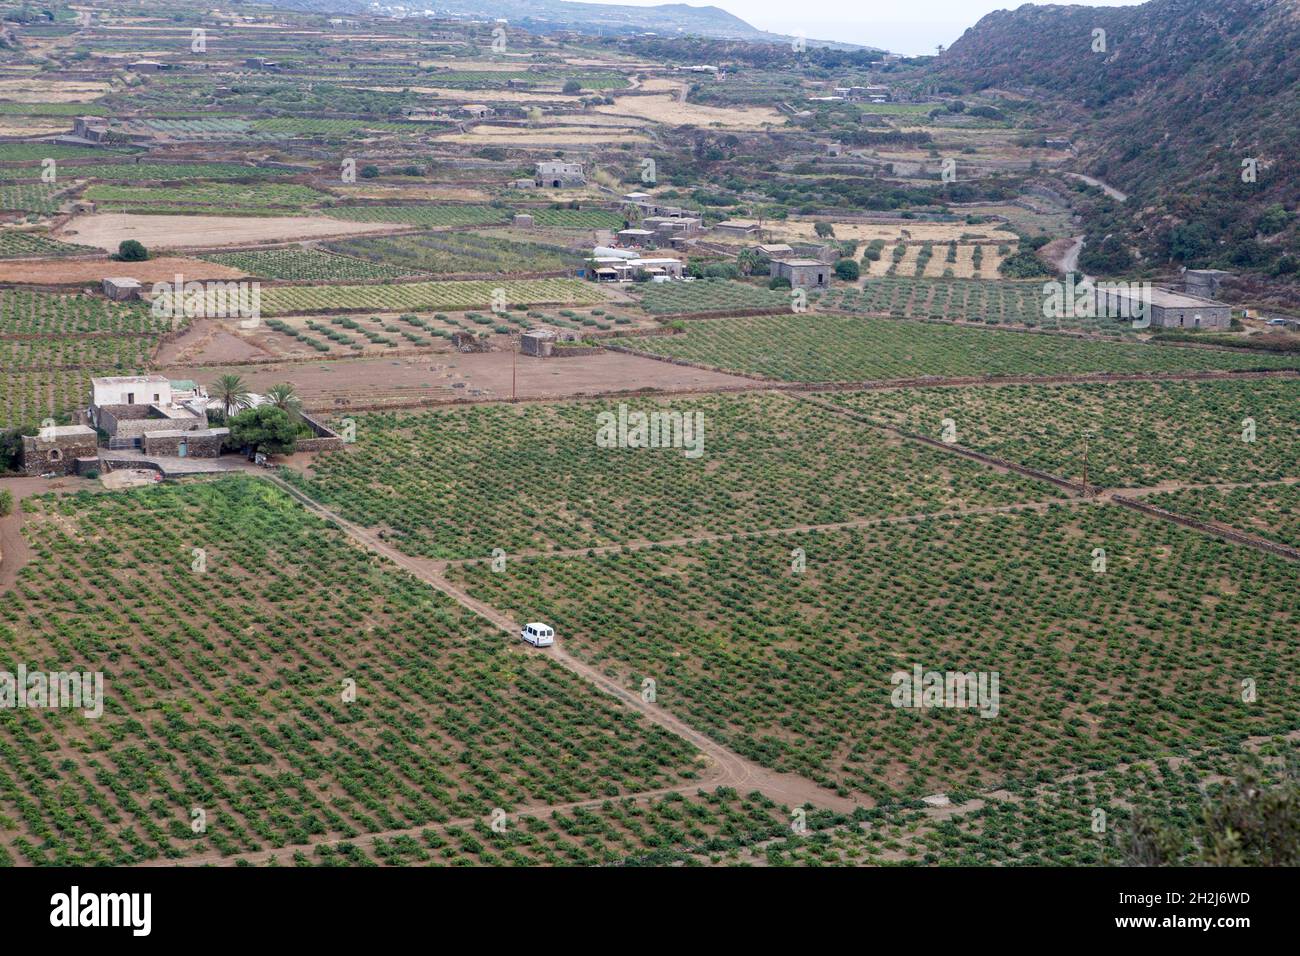 Monastero valley is among the most fertile areas of the island almost entirely covered with vineyards of the well known Zibibbo grapes Stock Photo